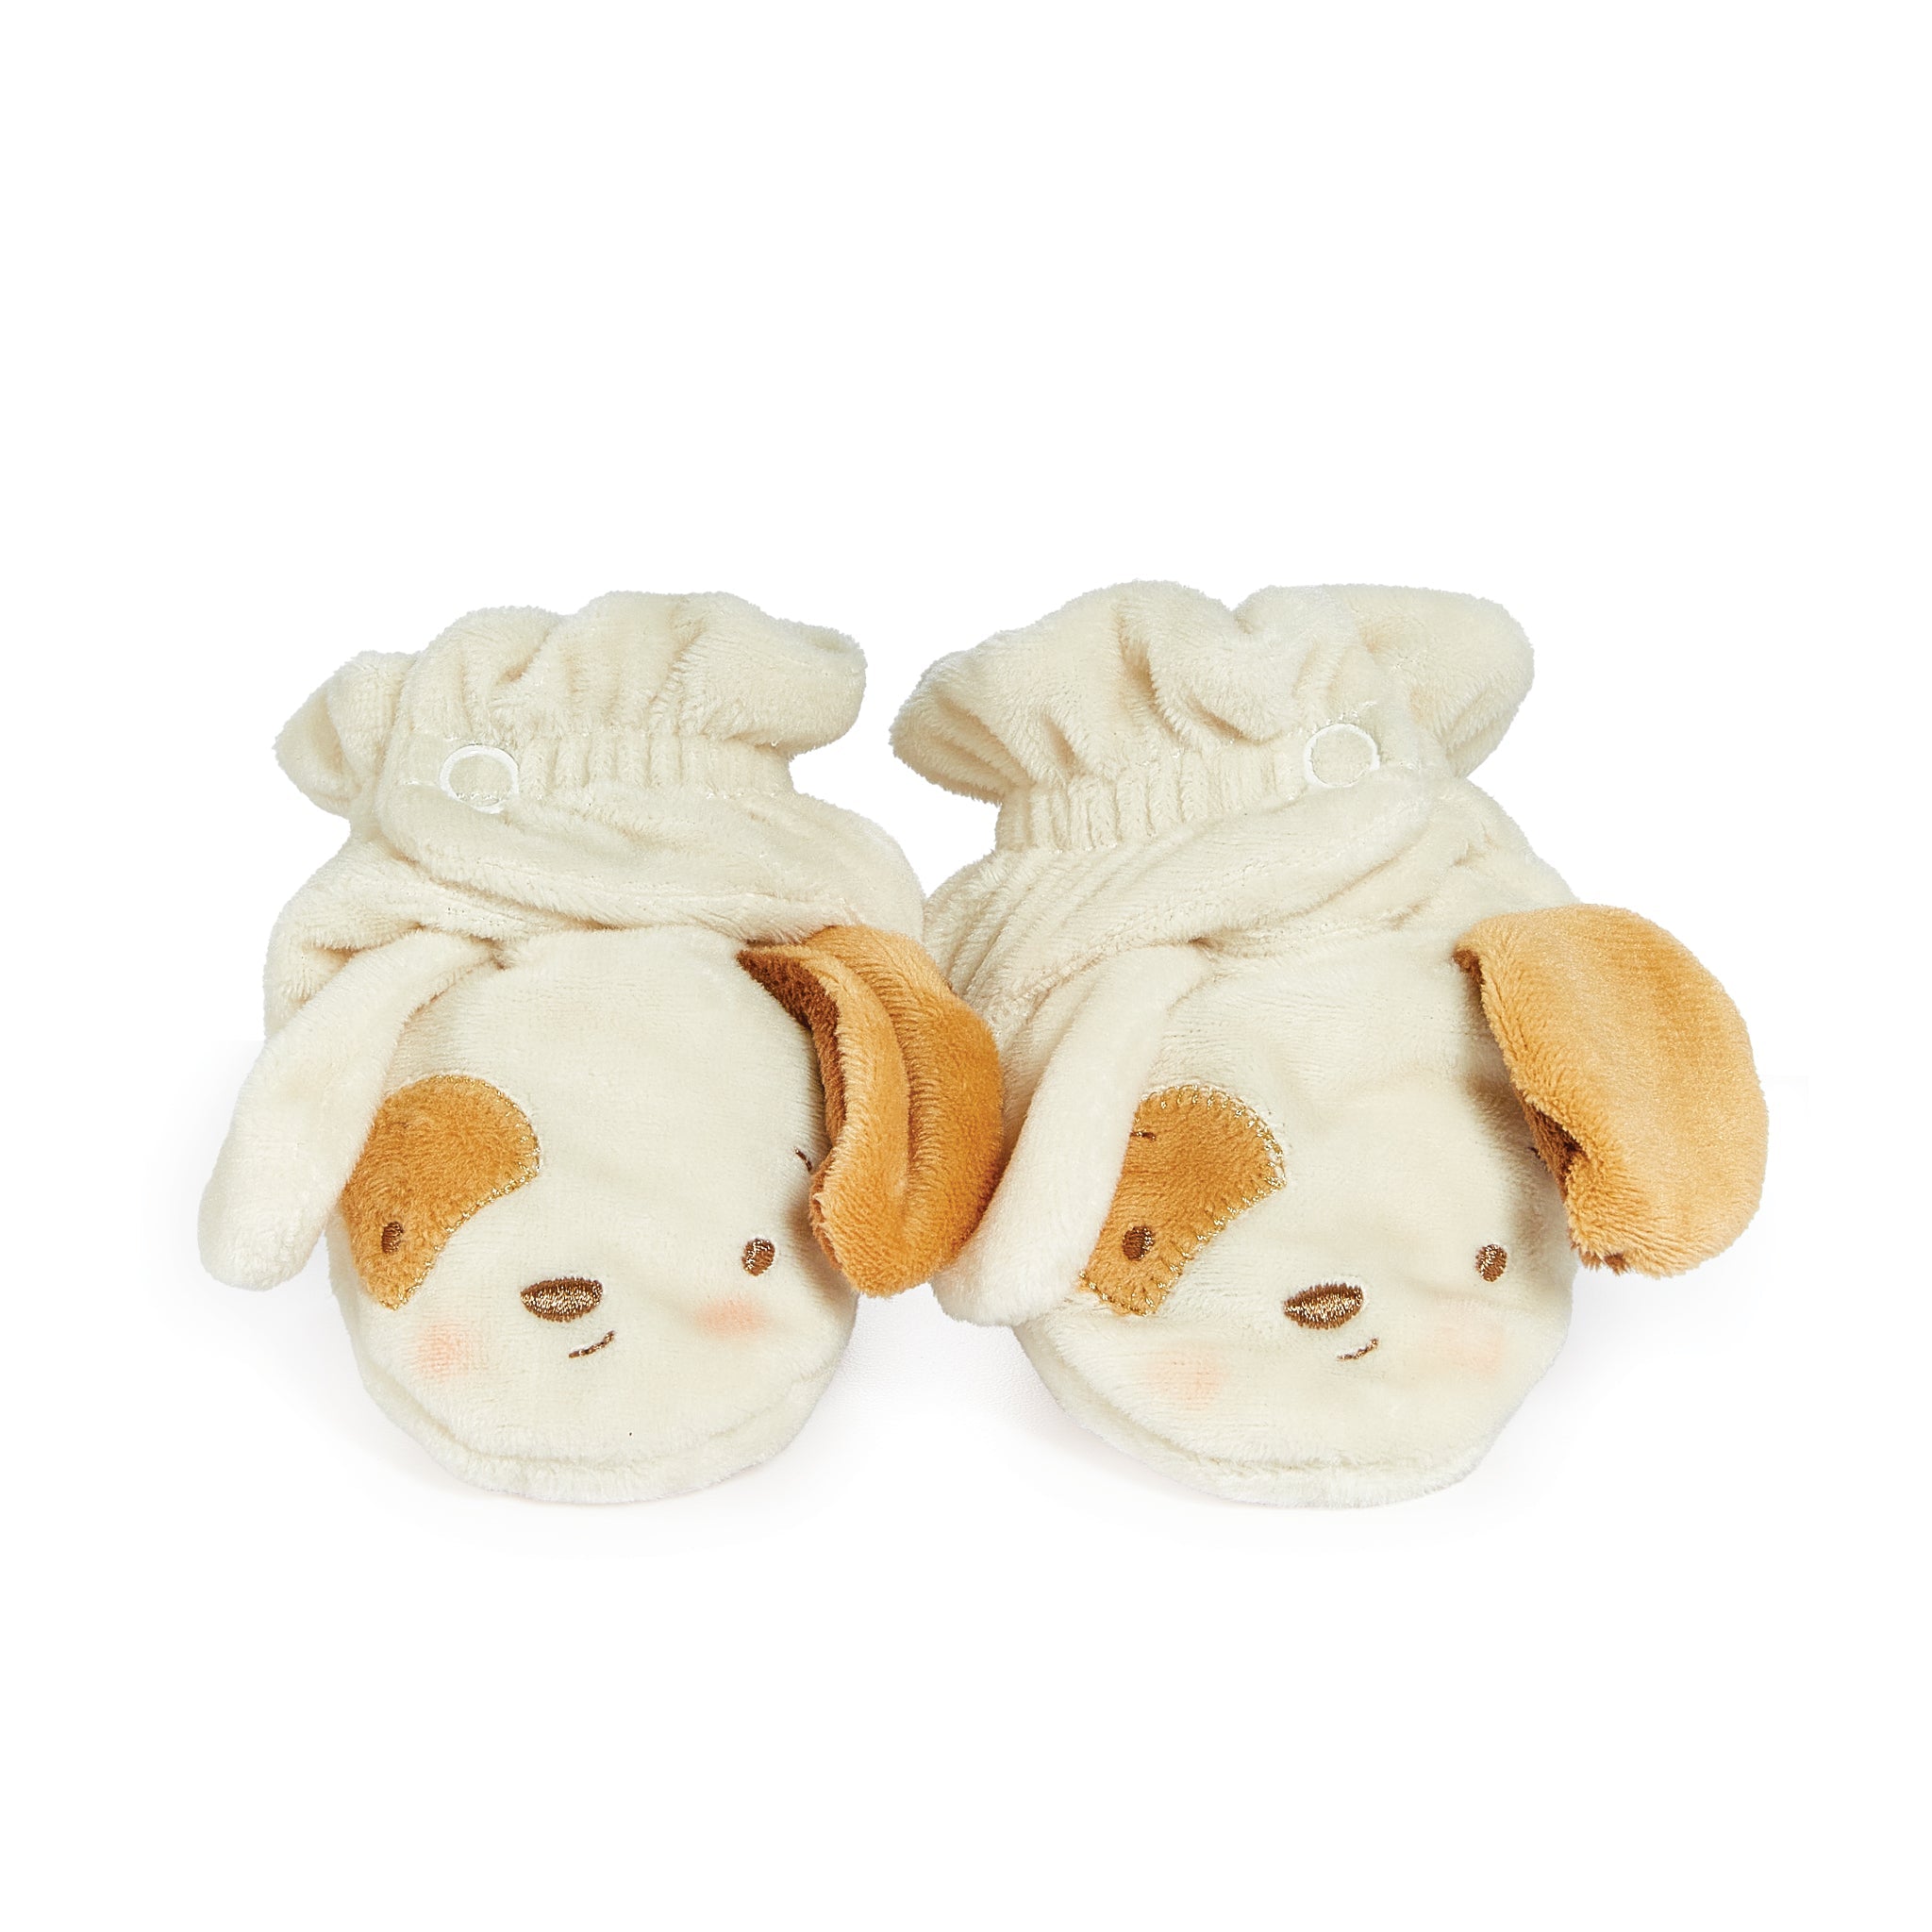 Yipper Puppy Slippers-Accessories-SKU: 103156 - Bunnies By The Bay